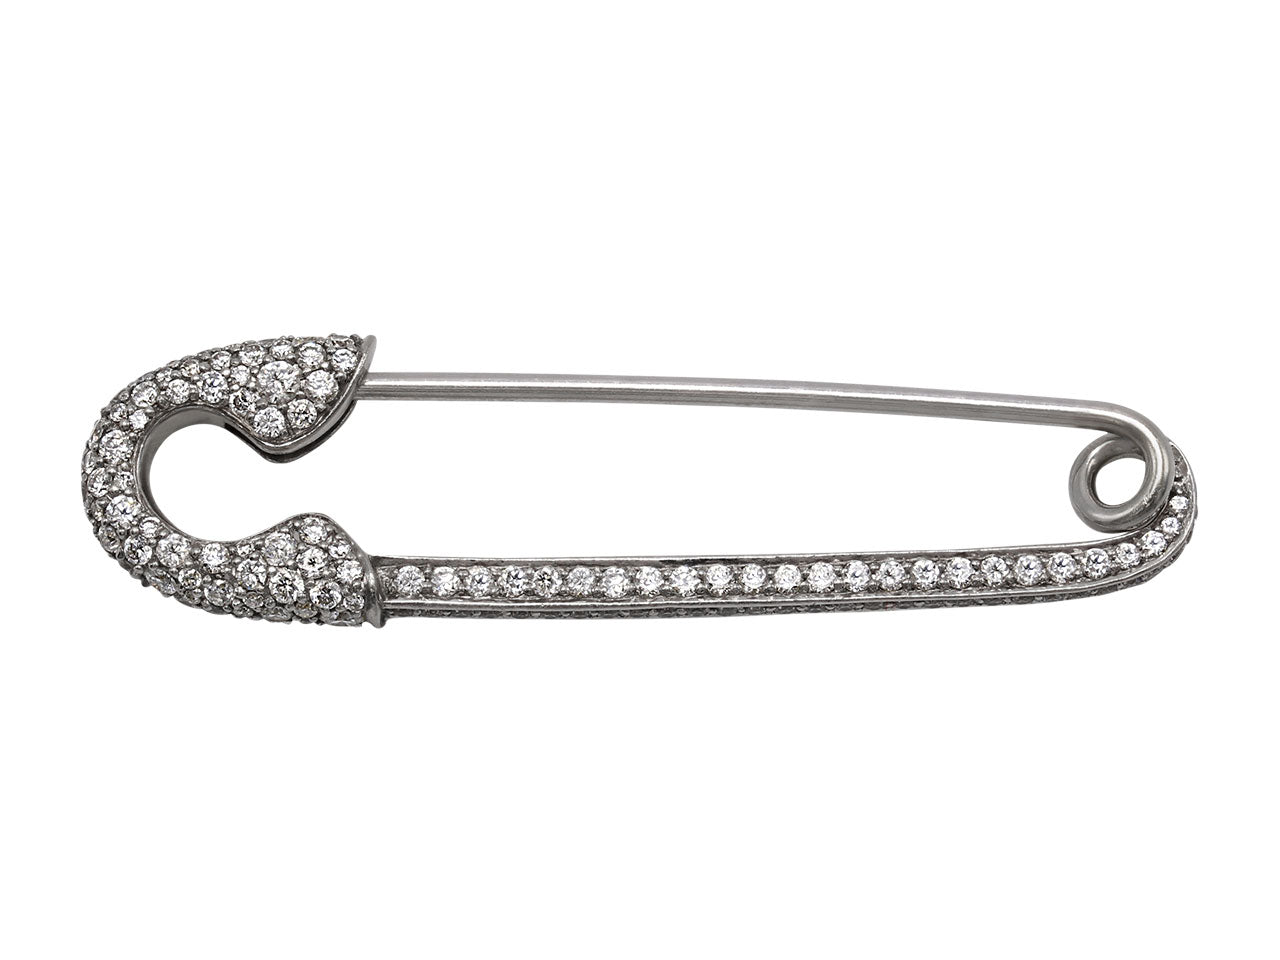 Crow's Nest 'Safety First' Brooch in 18K White Gold